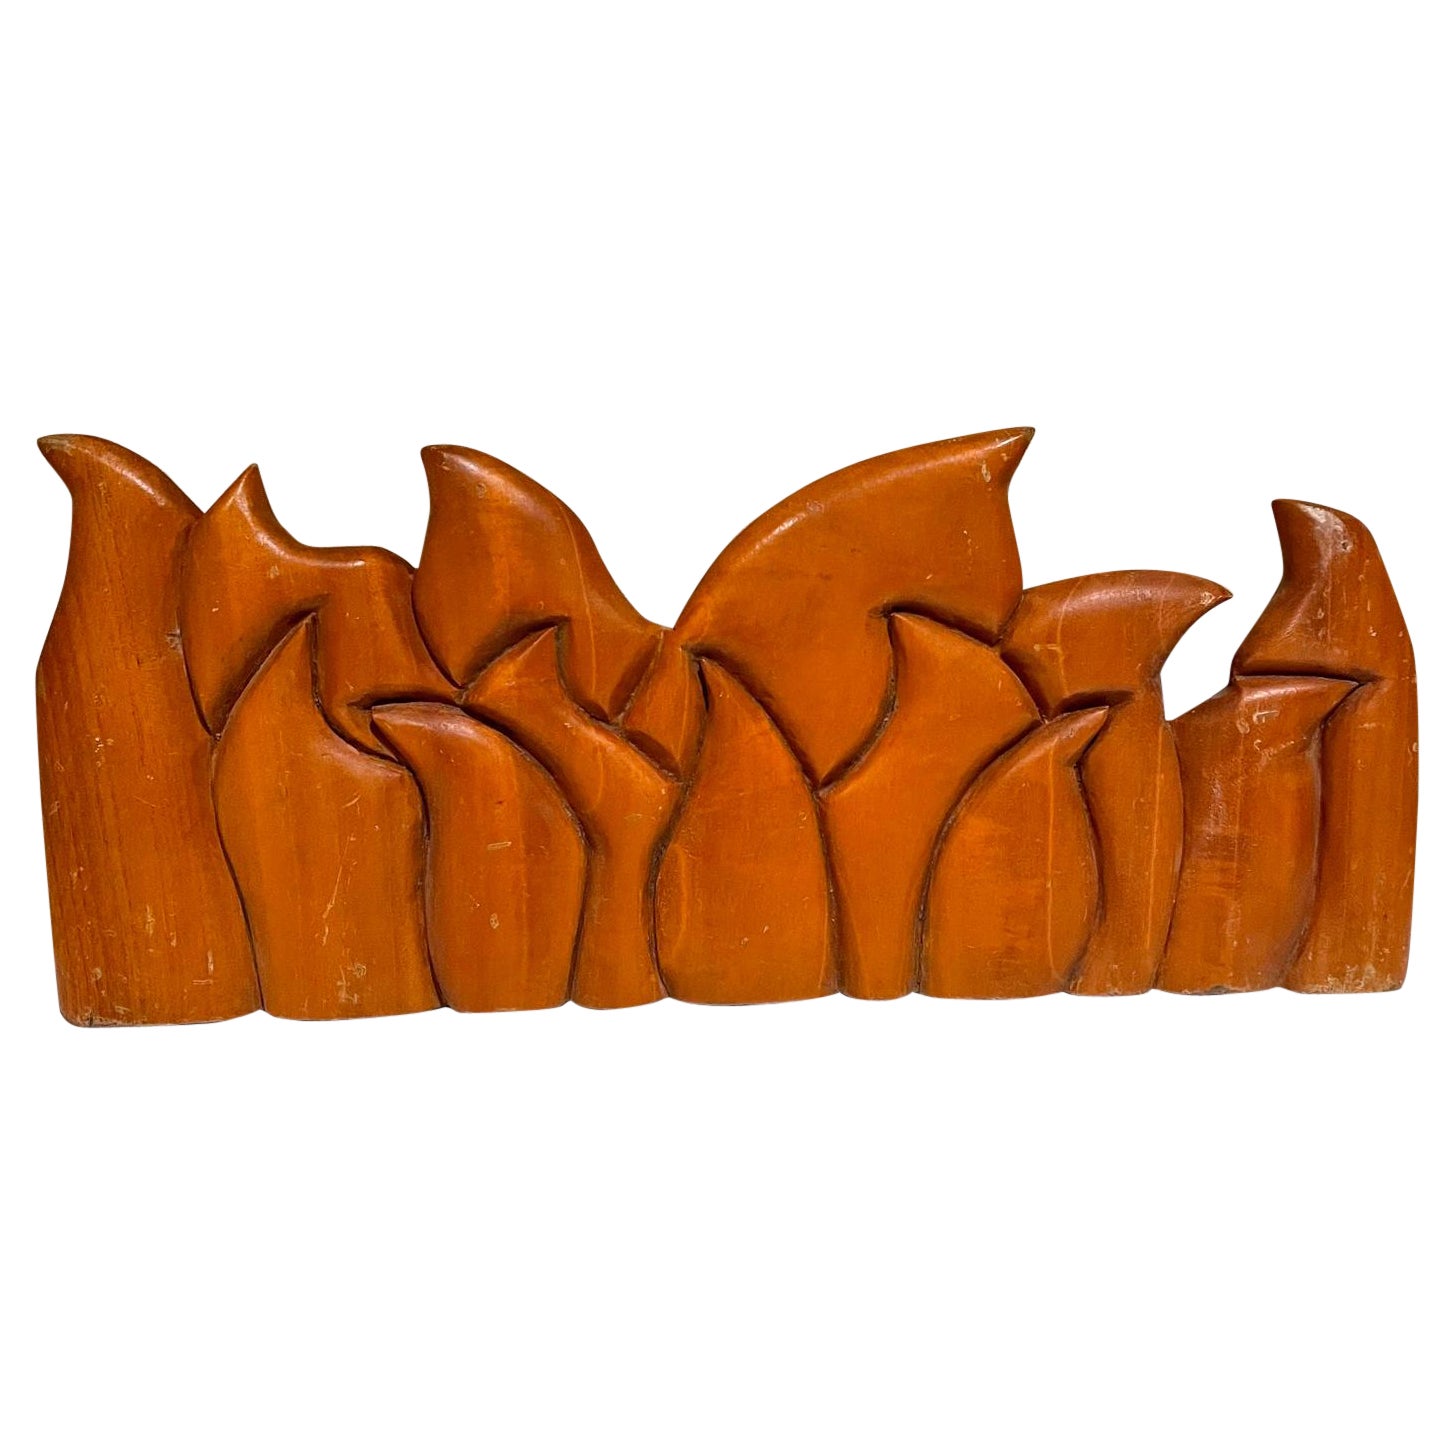   1999 Last Supper Abstract Wood Sculpture signed Victor Rozo Mexico DF For Sale